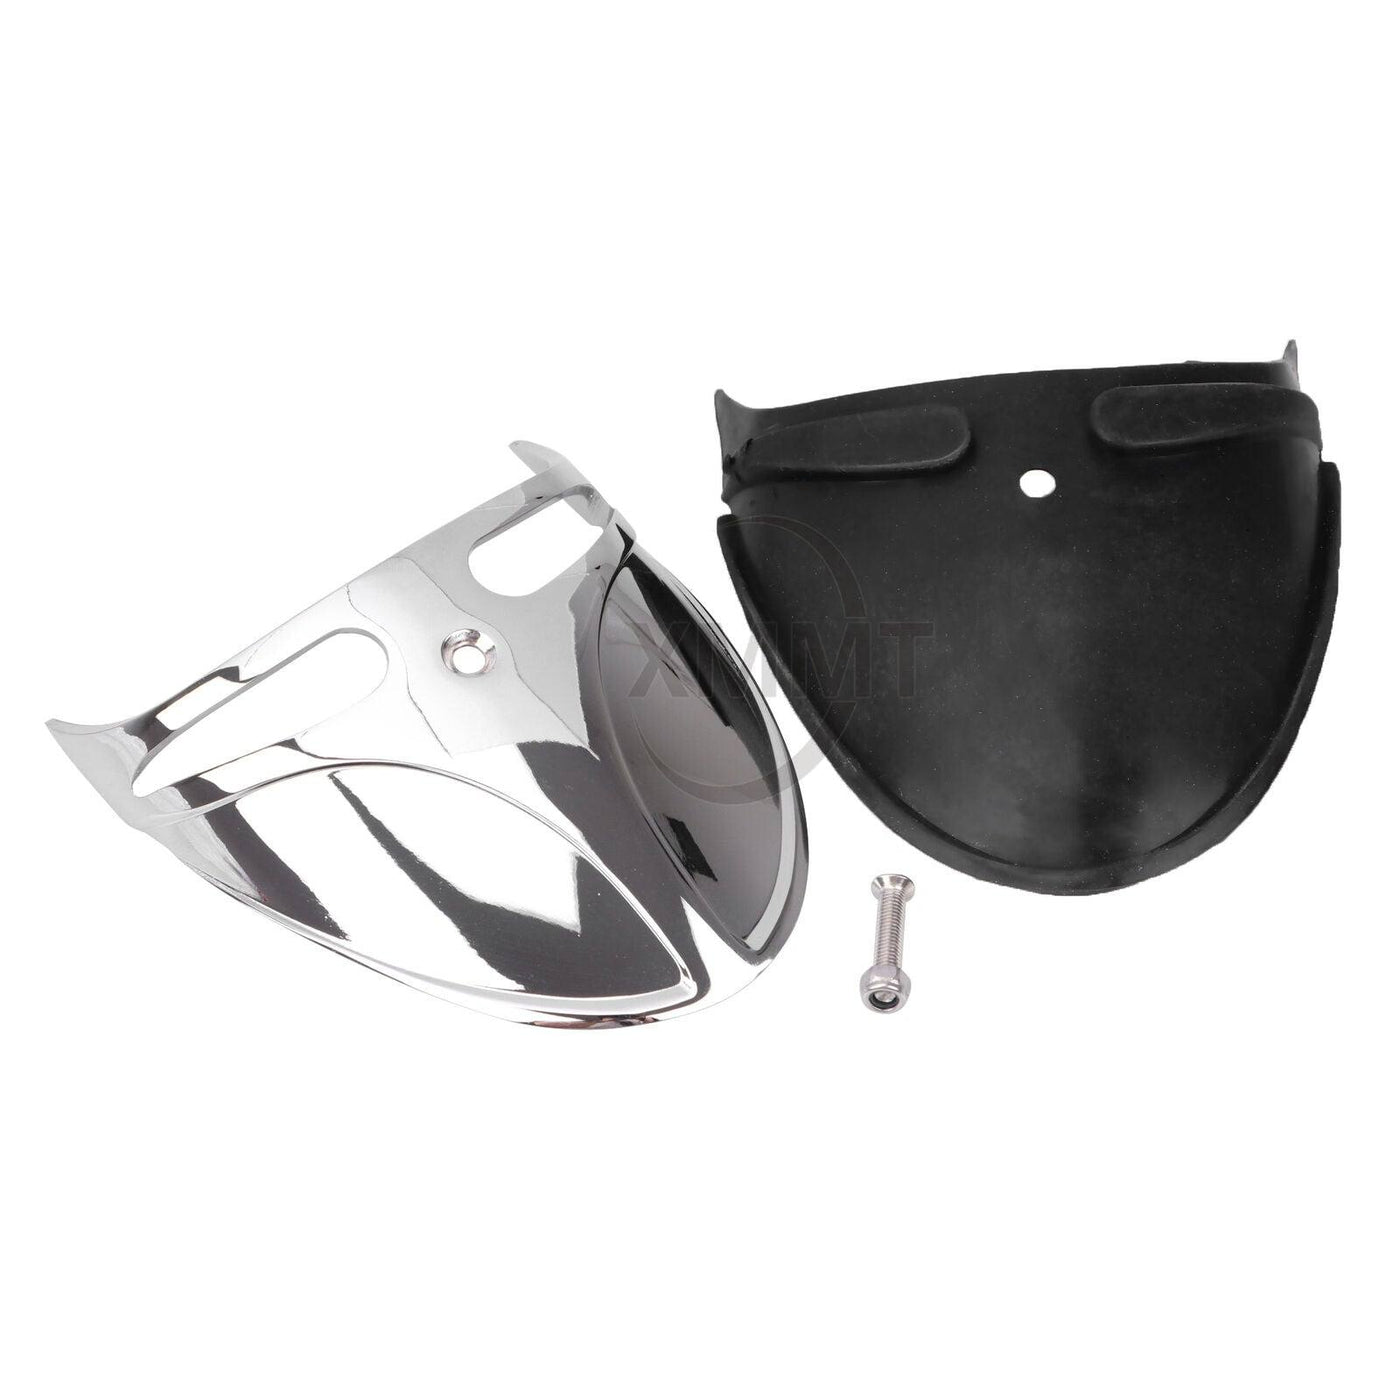 Fender Extension Mud Flap Trim Narrow For Harley Sportster 883 Dyna FXST Chrome - Moto Life Products